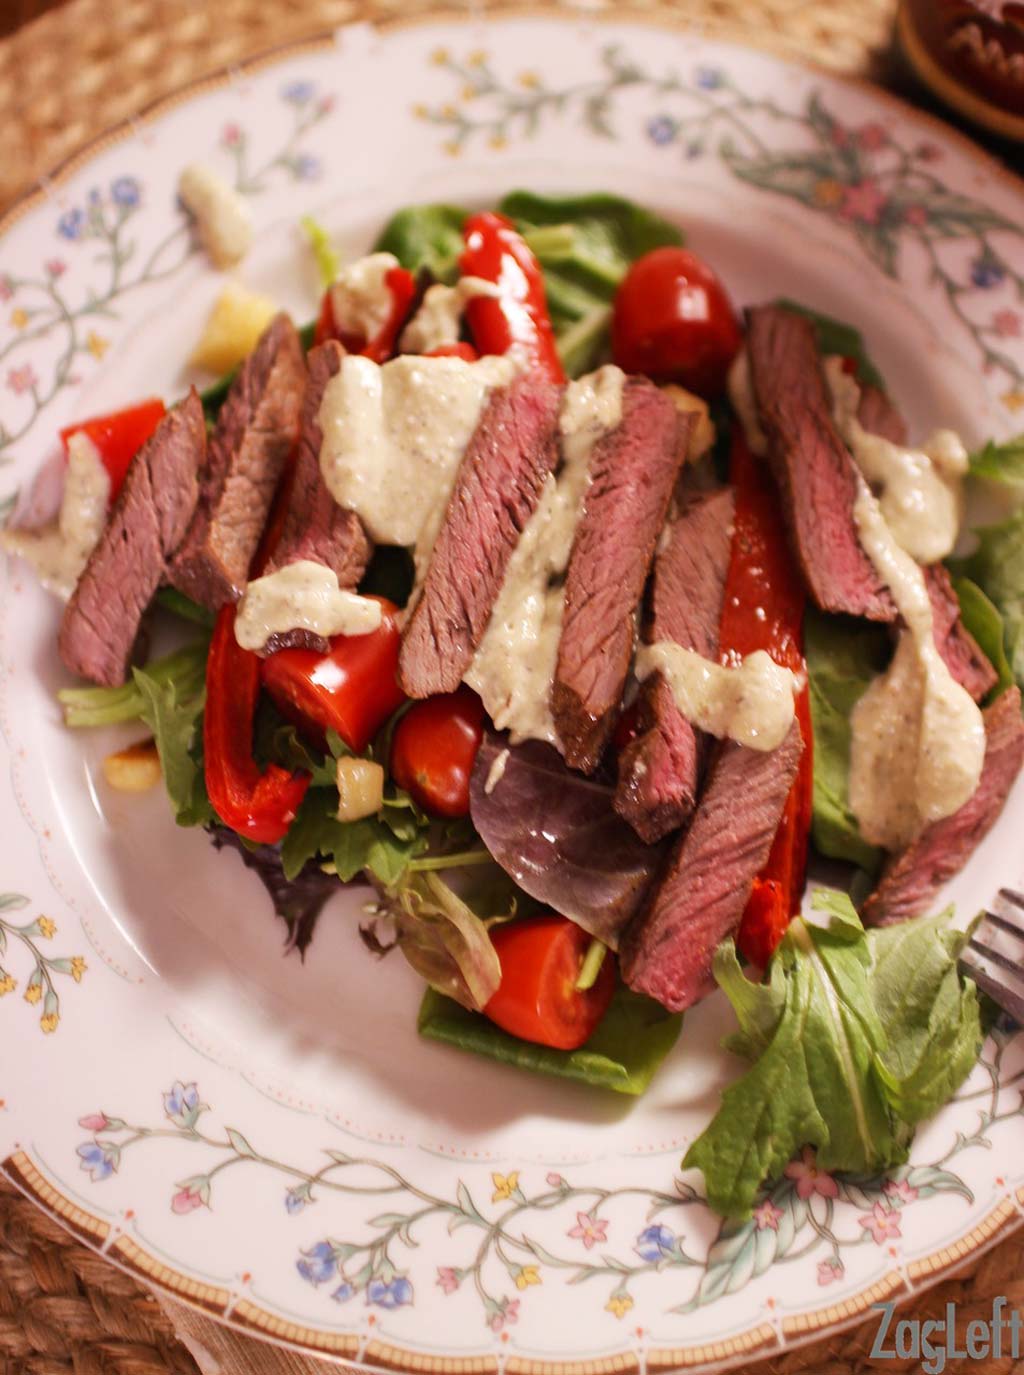 An overhead view of a Steak Salad with Gorgonzola Dressing.